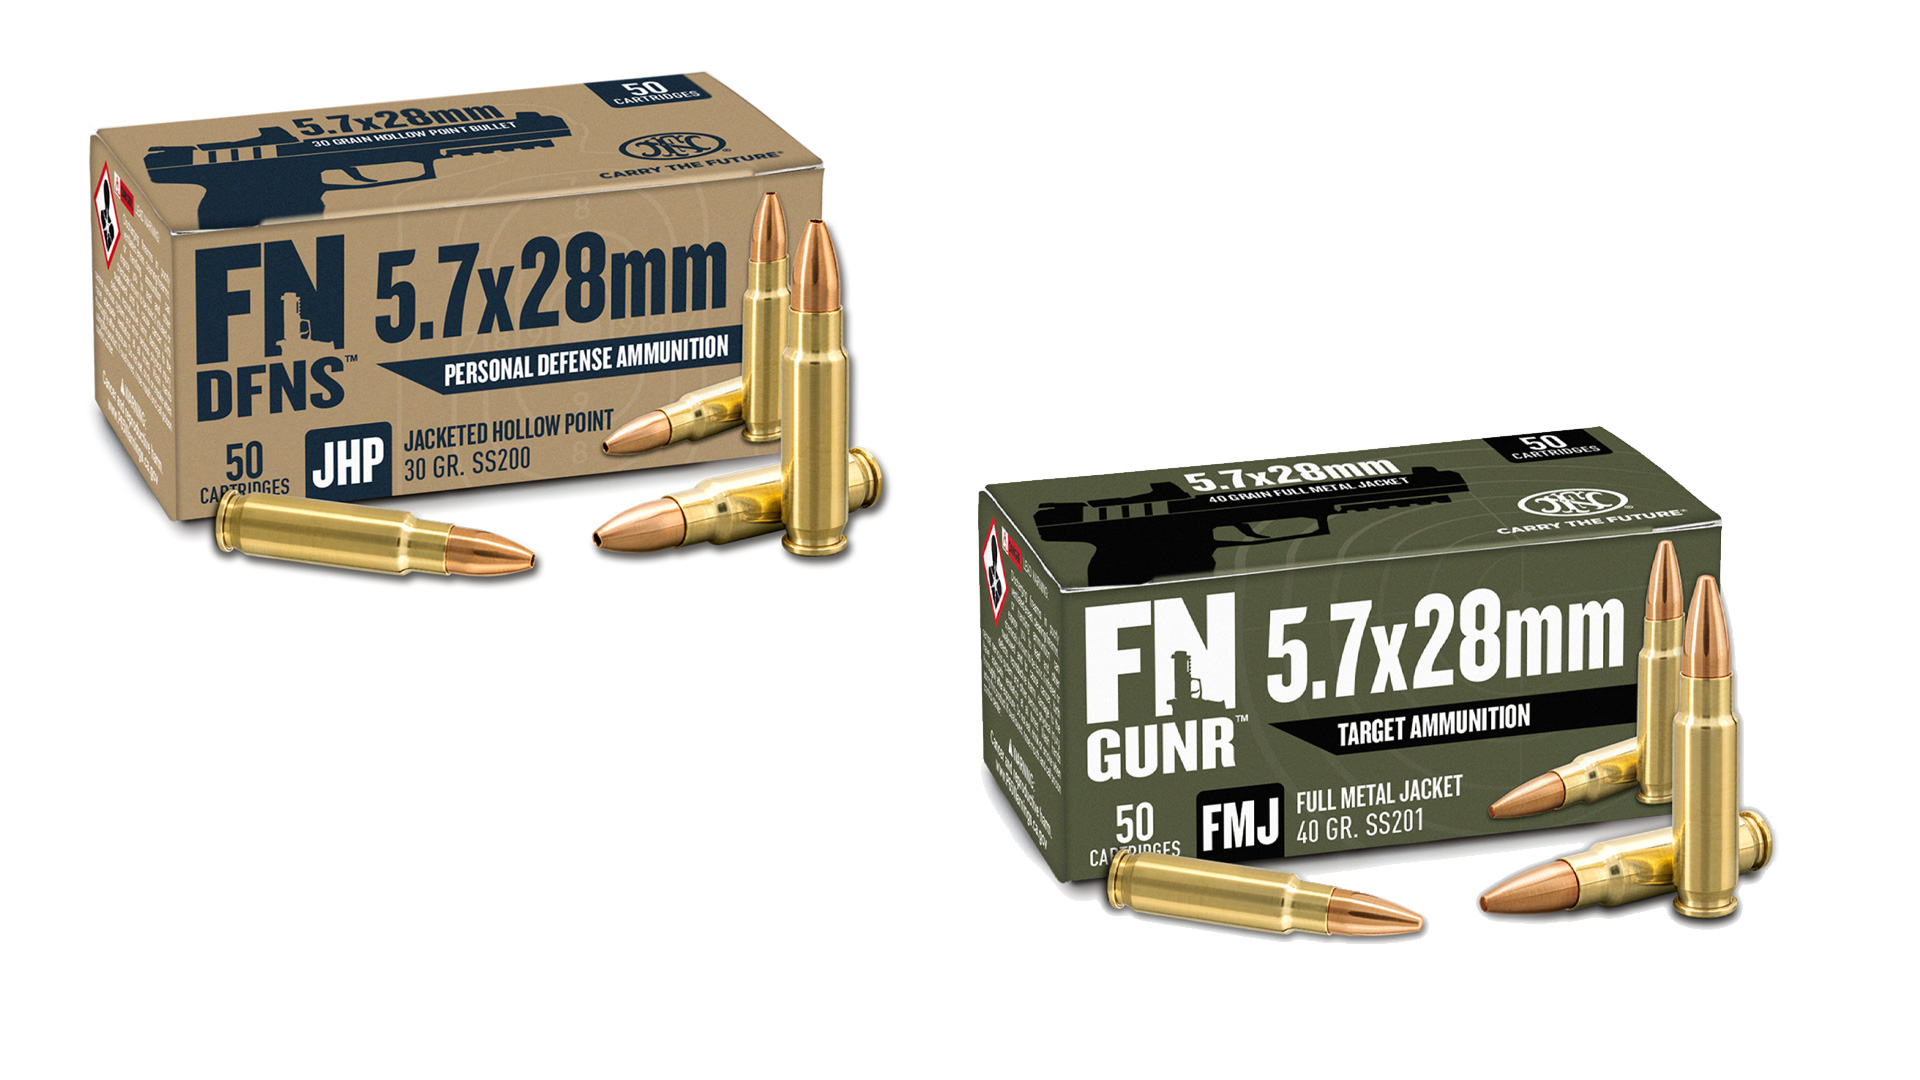 Great Price on Quality FN 5.7×28mm Brass Casings - 50 and 100 Count